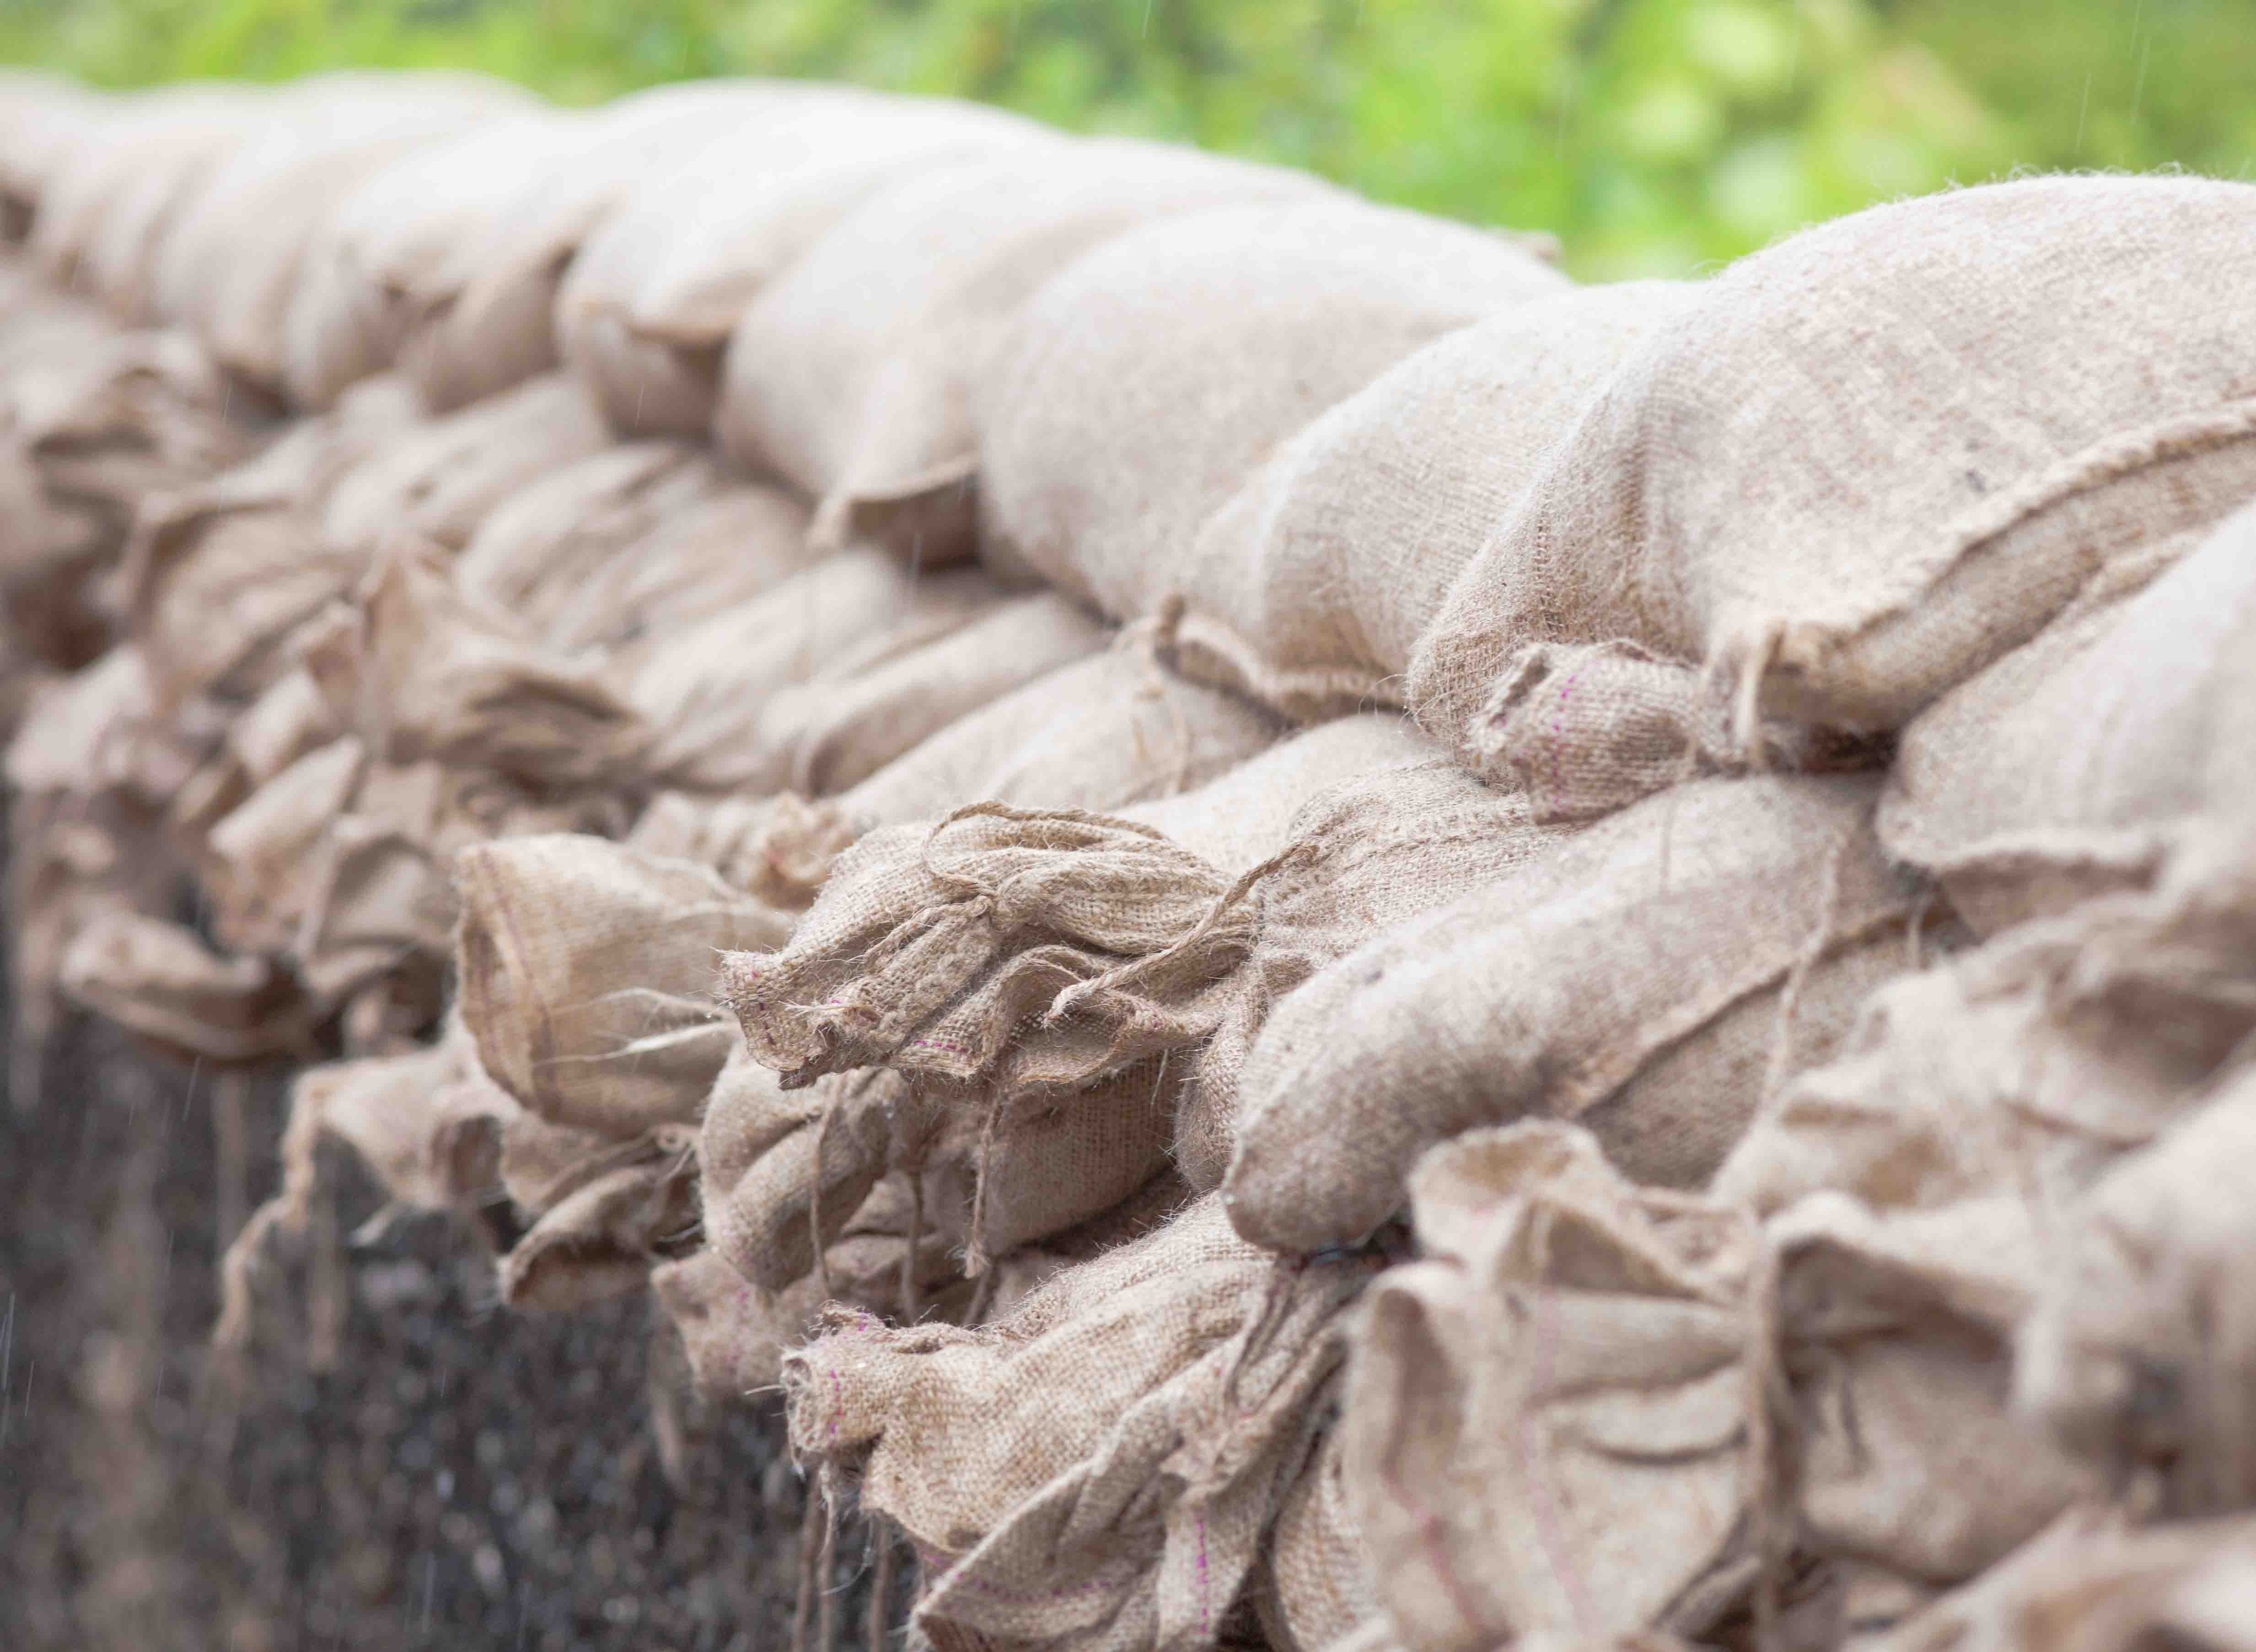 Sandbags on floodwater to stop the water who comes in. picture with short focus.